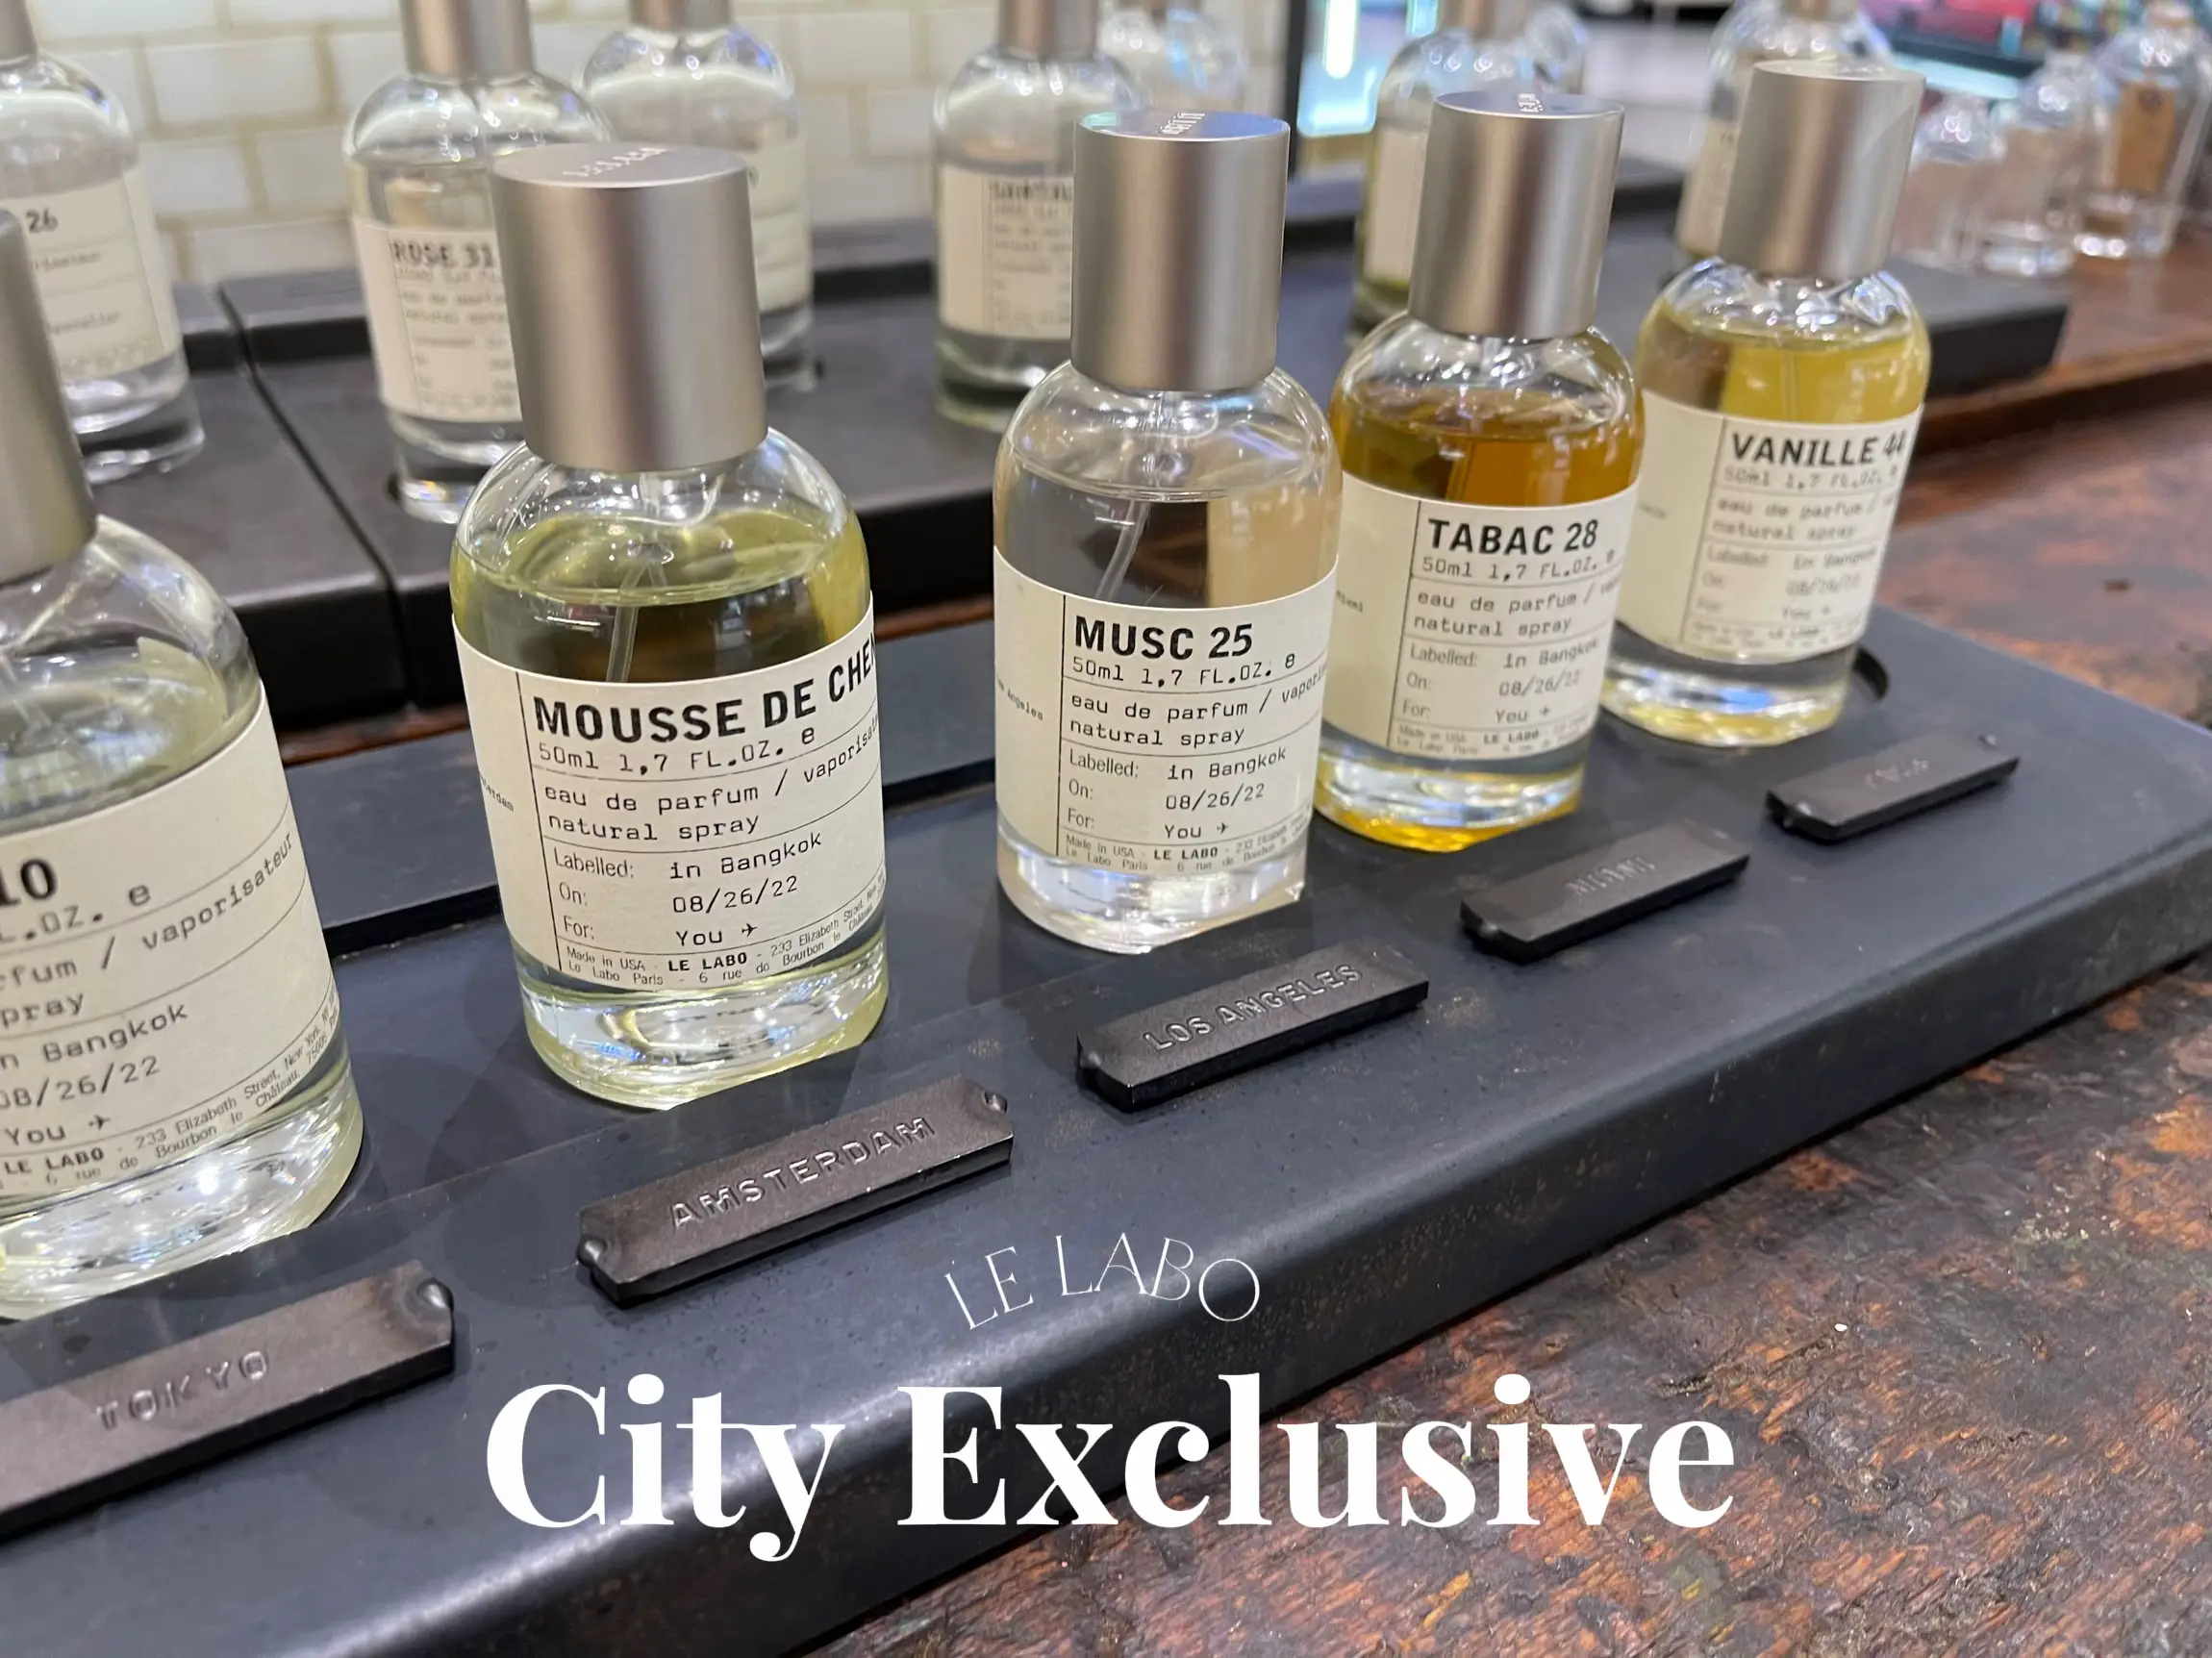 City Exclusive From Le Labo Home One Year Only Available Month 9